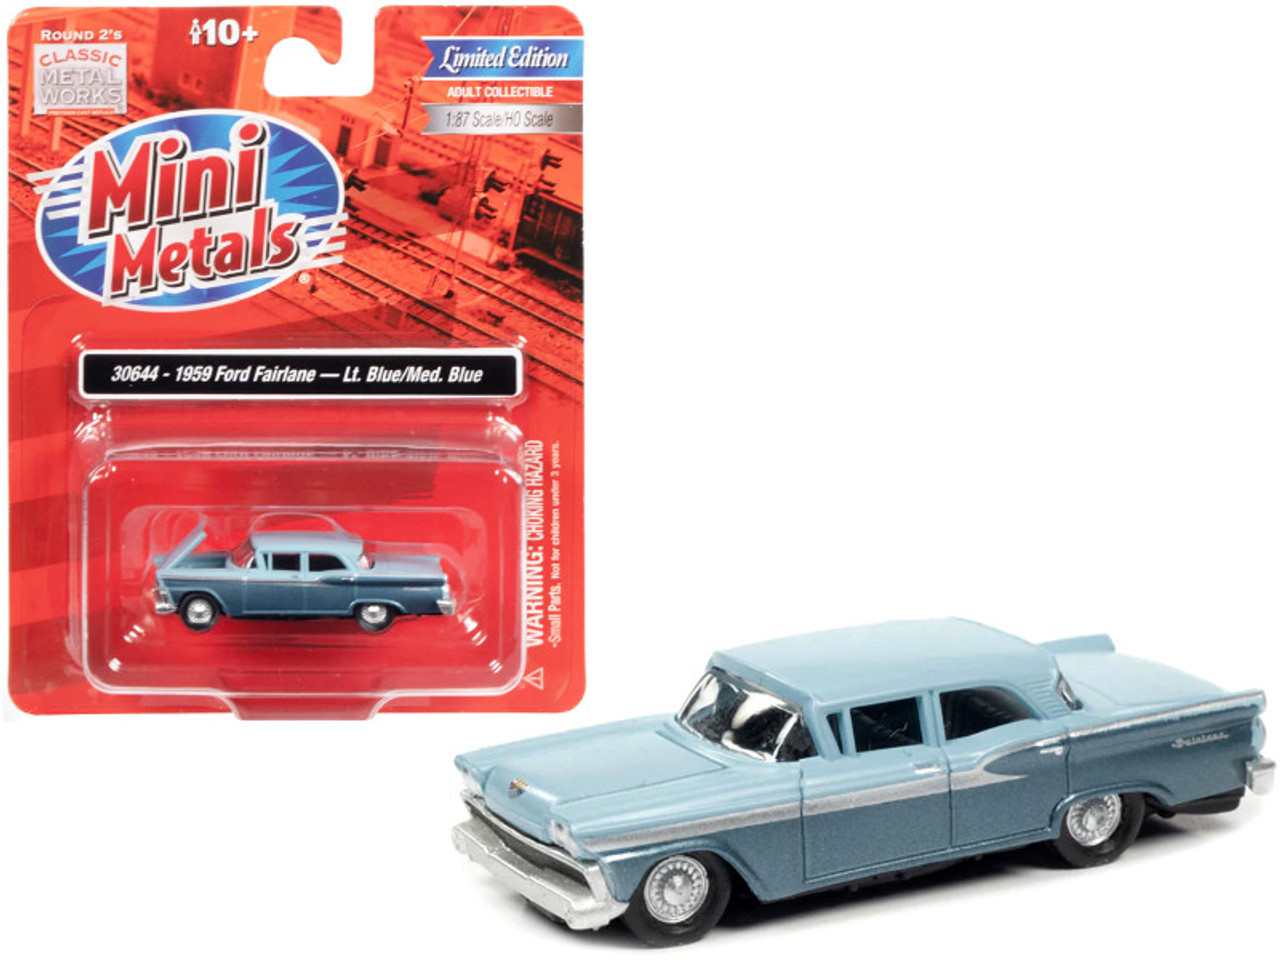 1959 Ford Fairlane Wedgewood Blue and Surf Blue Metallic Two-Tone 1/87 (HO) Scale Model Car by Classic Metal Works